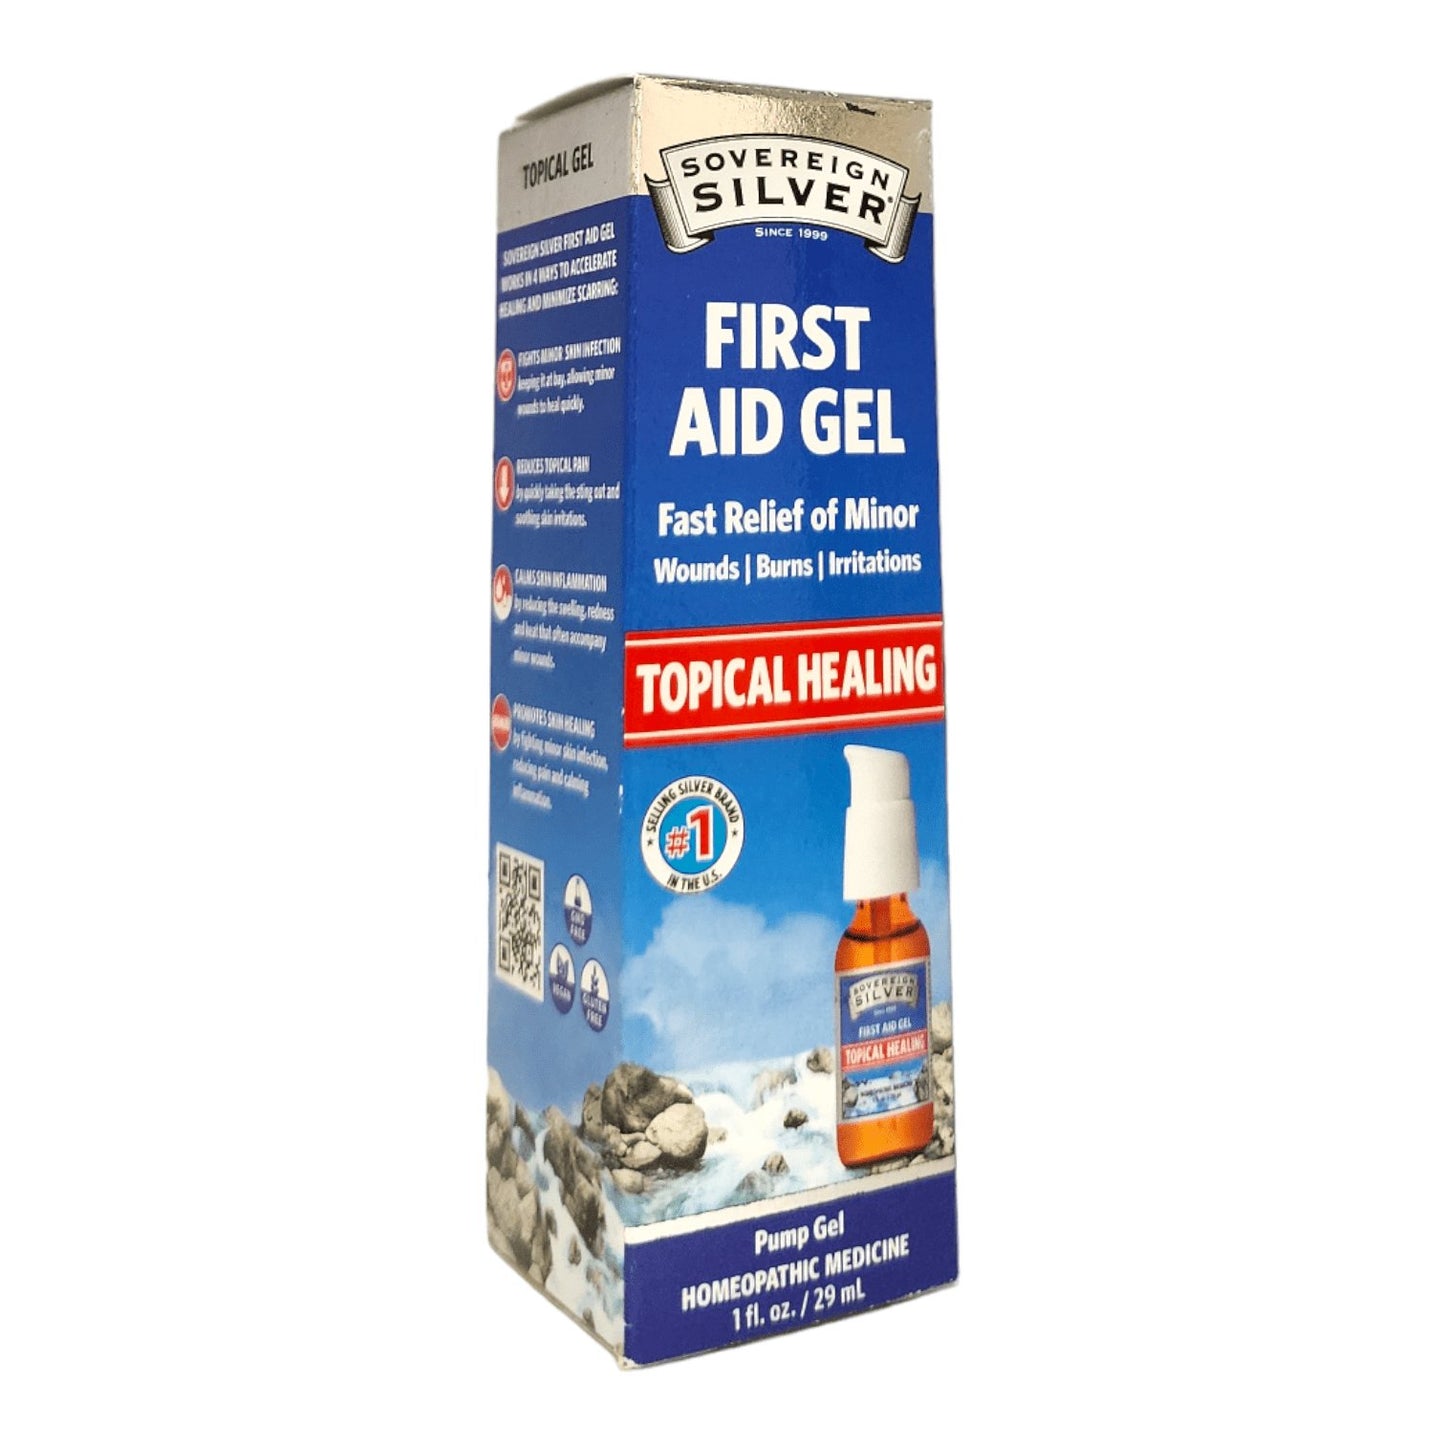 SOVEREIGN SILVER - BIO/ACTIVE SILVER HYDROSOL - FIRST AID - TOPICAL - The Vault